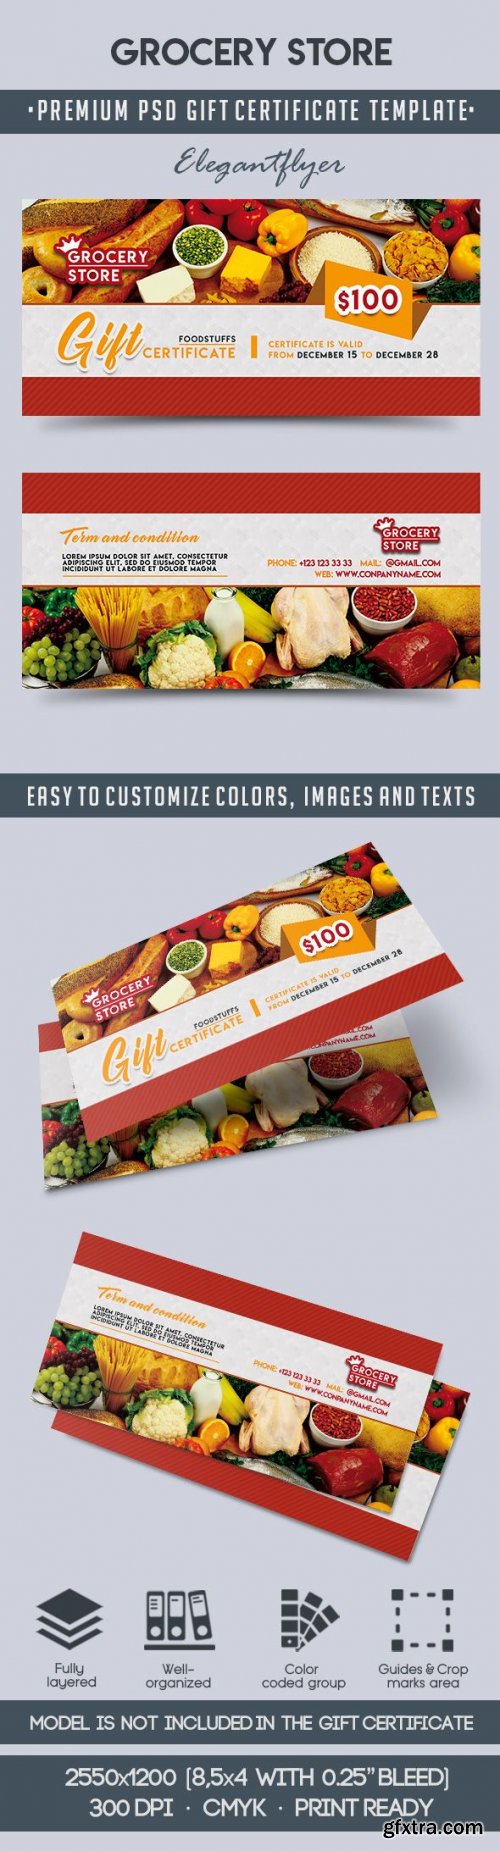 Grocery Store V1 Premium Gift Certificate PSD Template